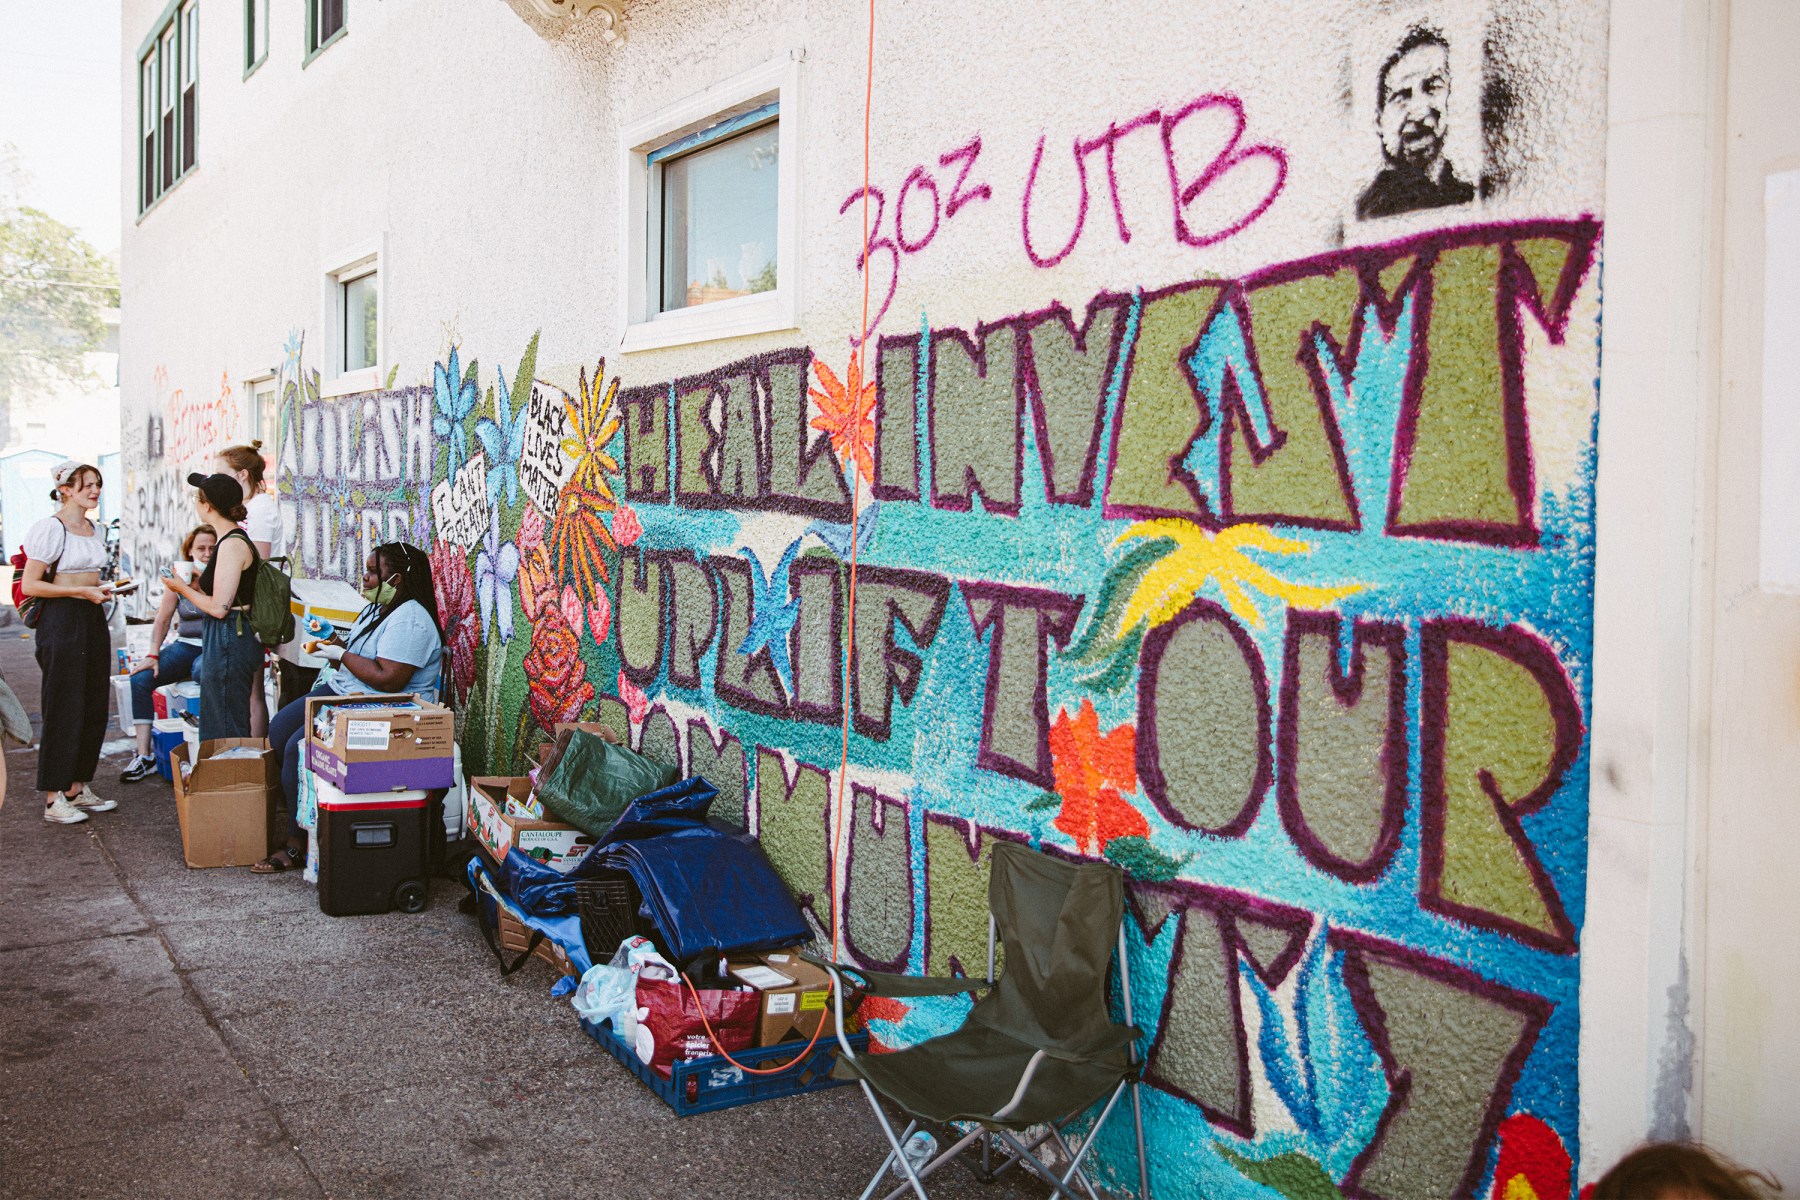 Messages on murals range from "Heal Invest Uplift Our Community" to "Abolish Police."